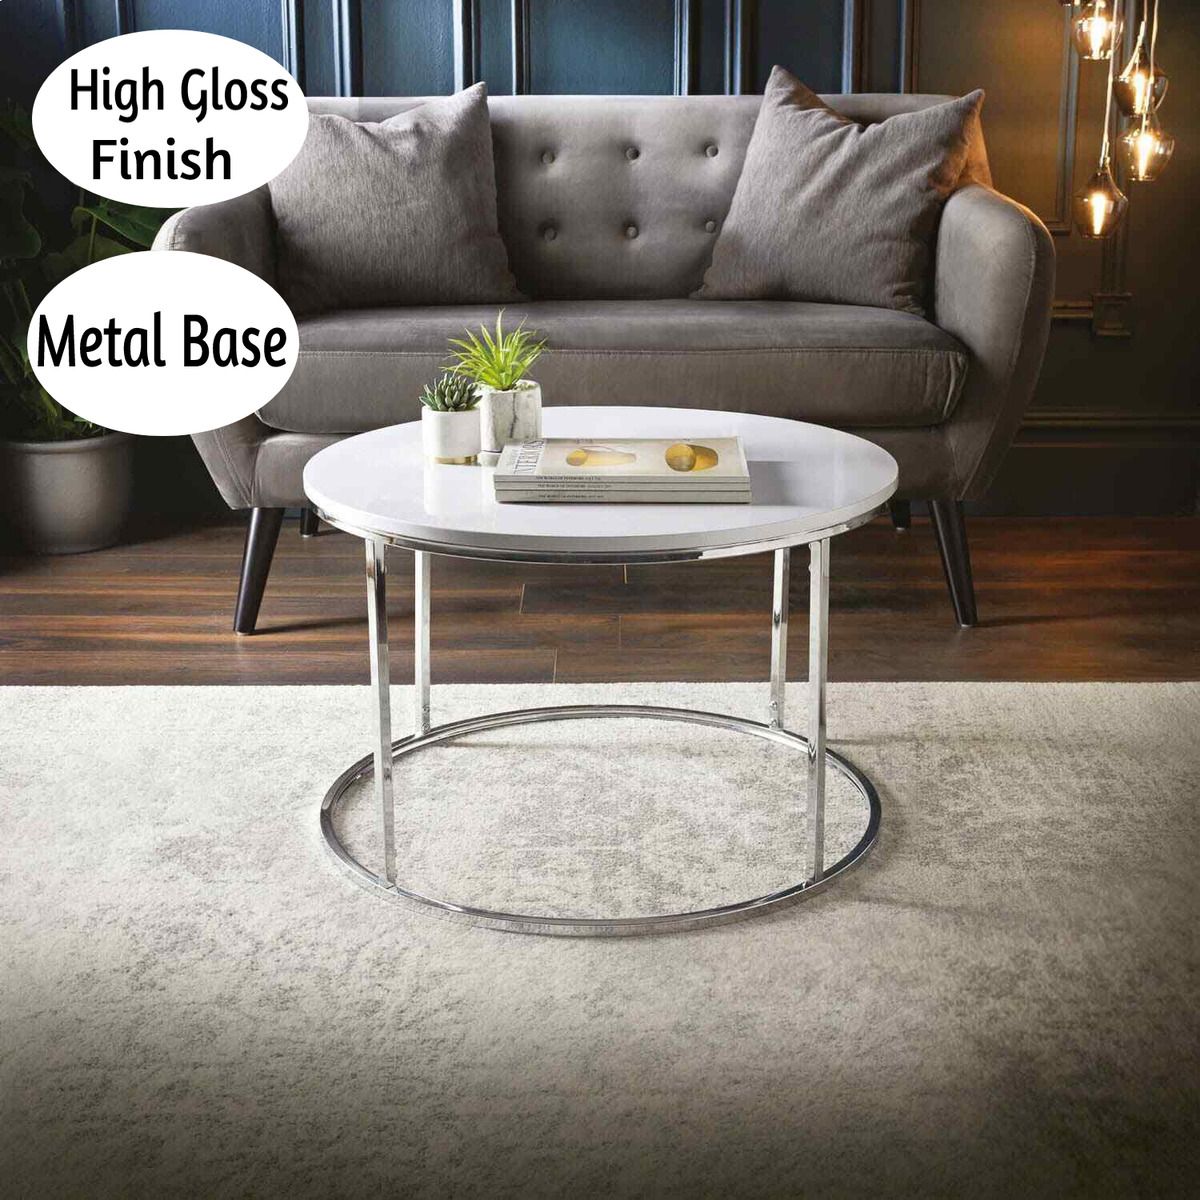 Round Coffee Table Living Room Sofa Center Side End High Gloss With Metal  Frame | Ebay Intended For Glossy Finished Metal Coffee Tables (Photo 3 of 15)